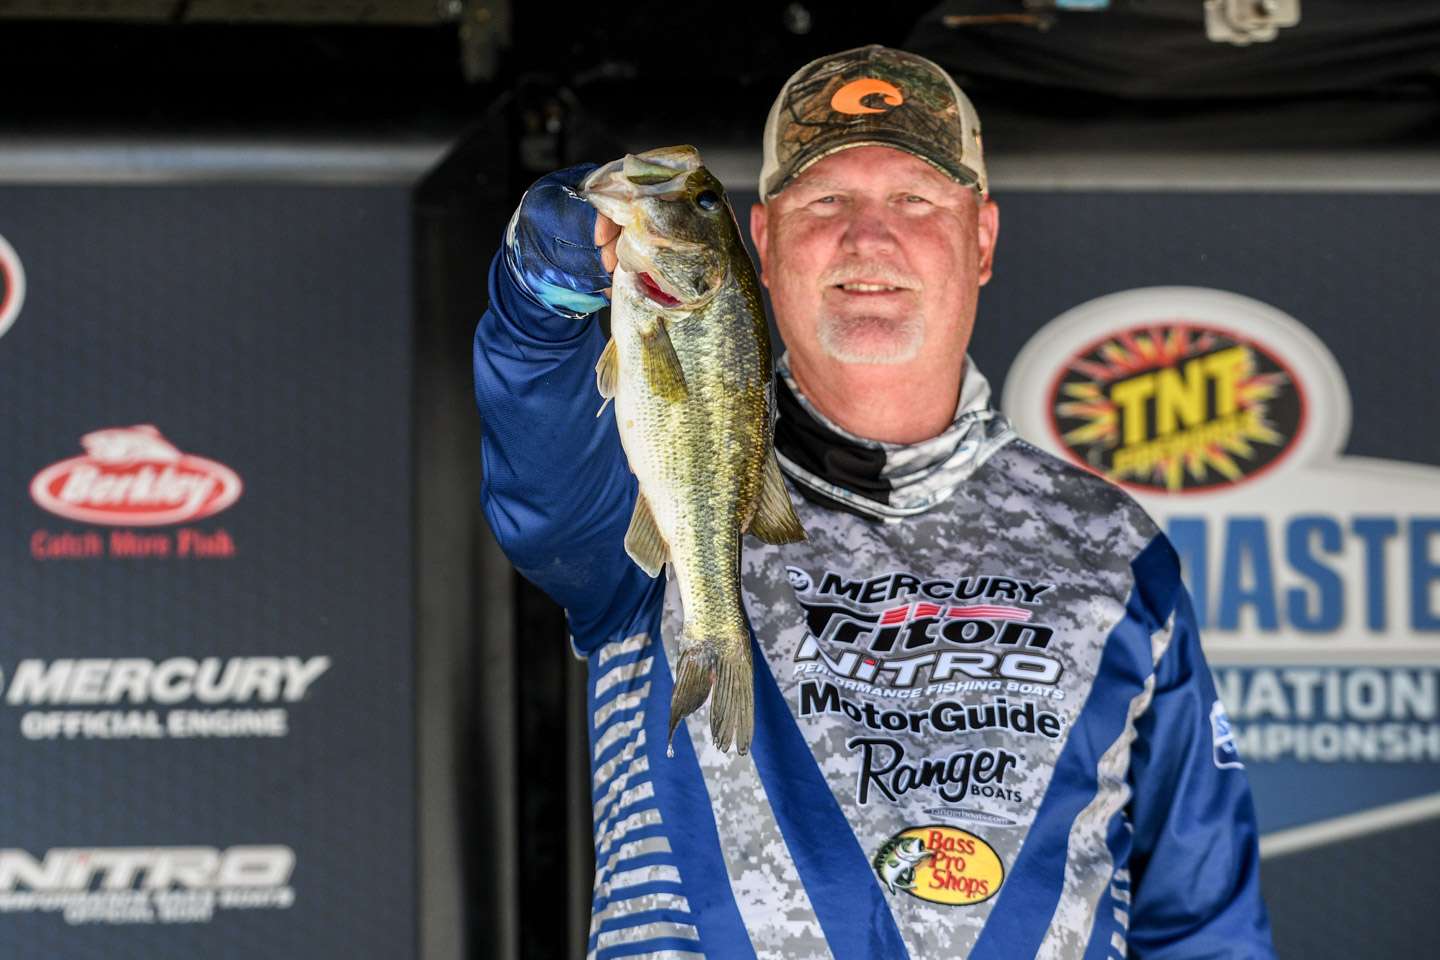 Jay Phillips, co-angler, West Virginia (12th, 10 - 14)